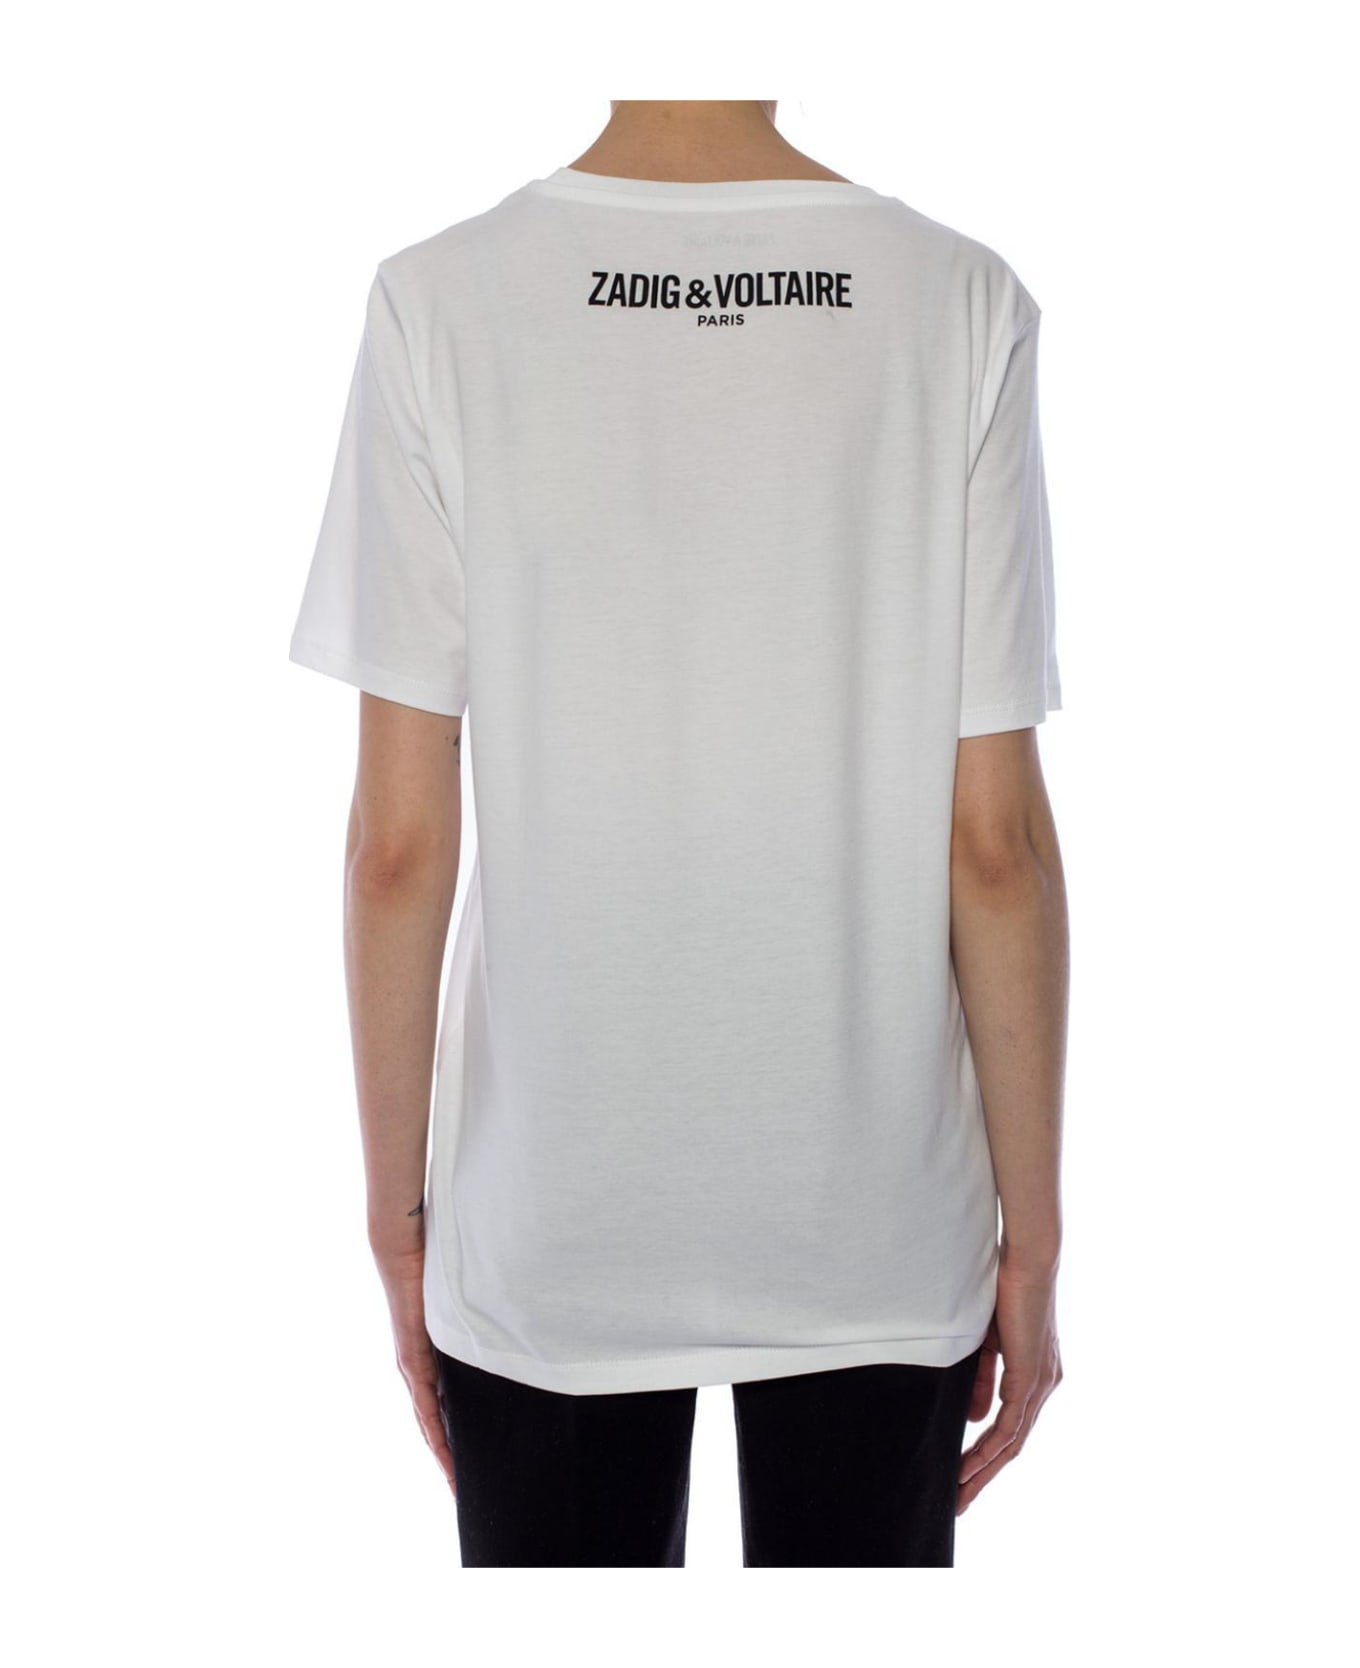 Zadig & Voltaire Patterned T-shirt - WHITE